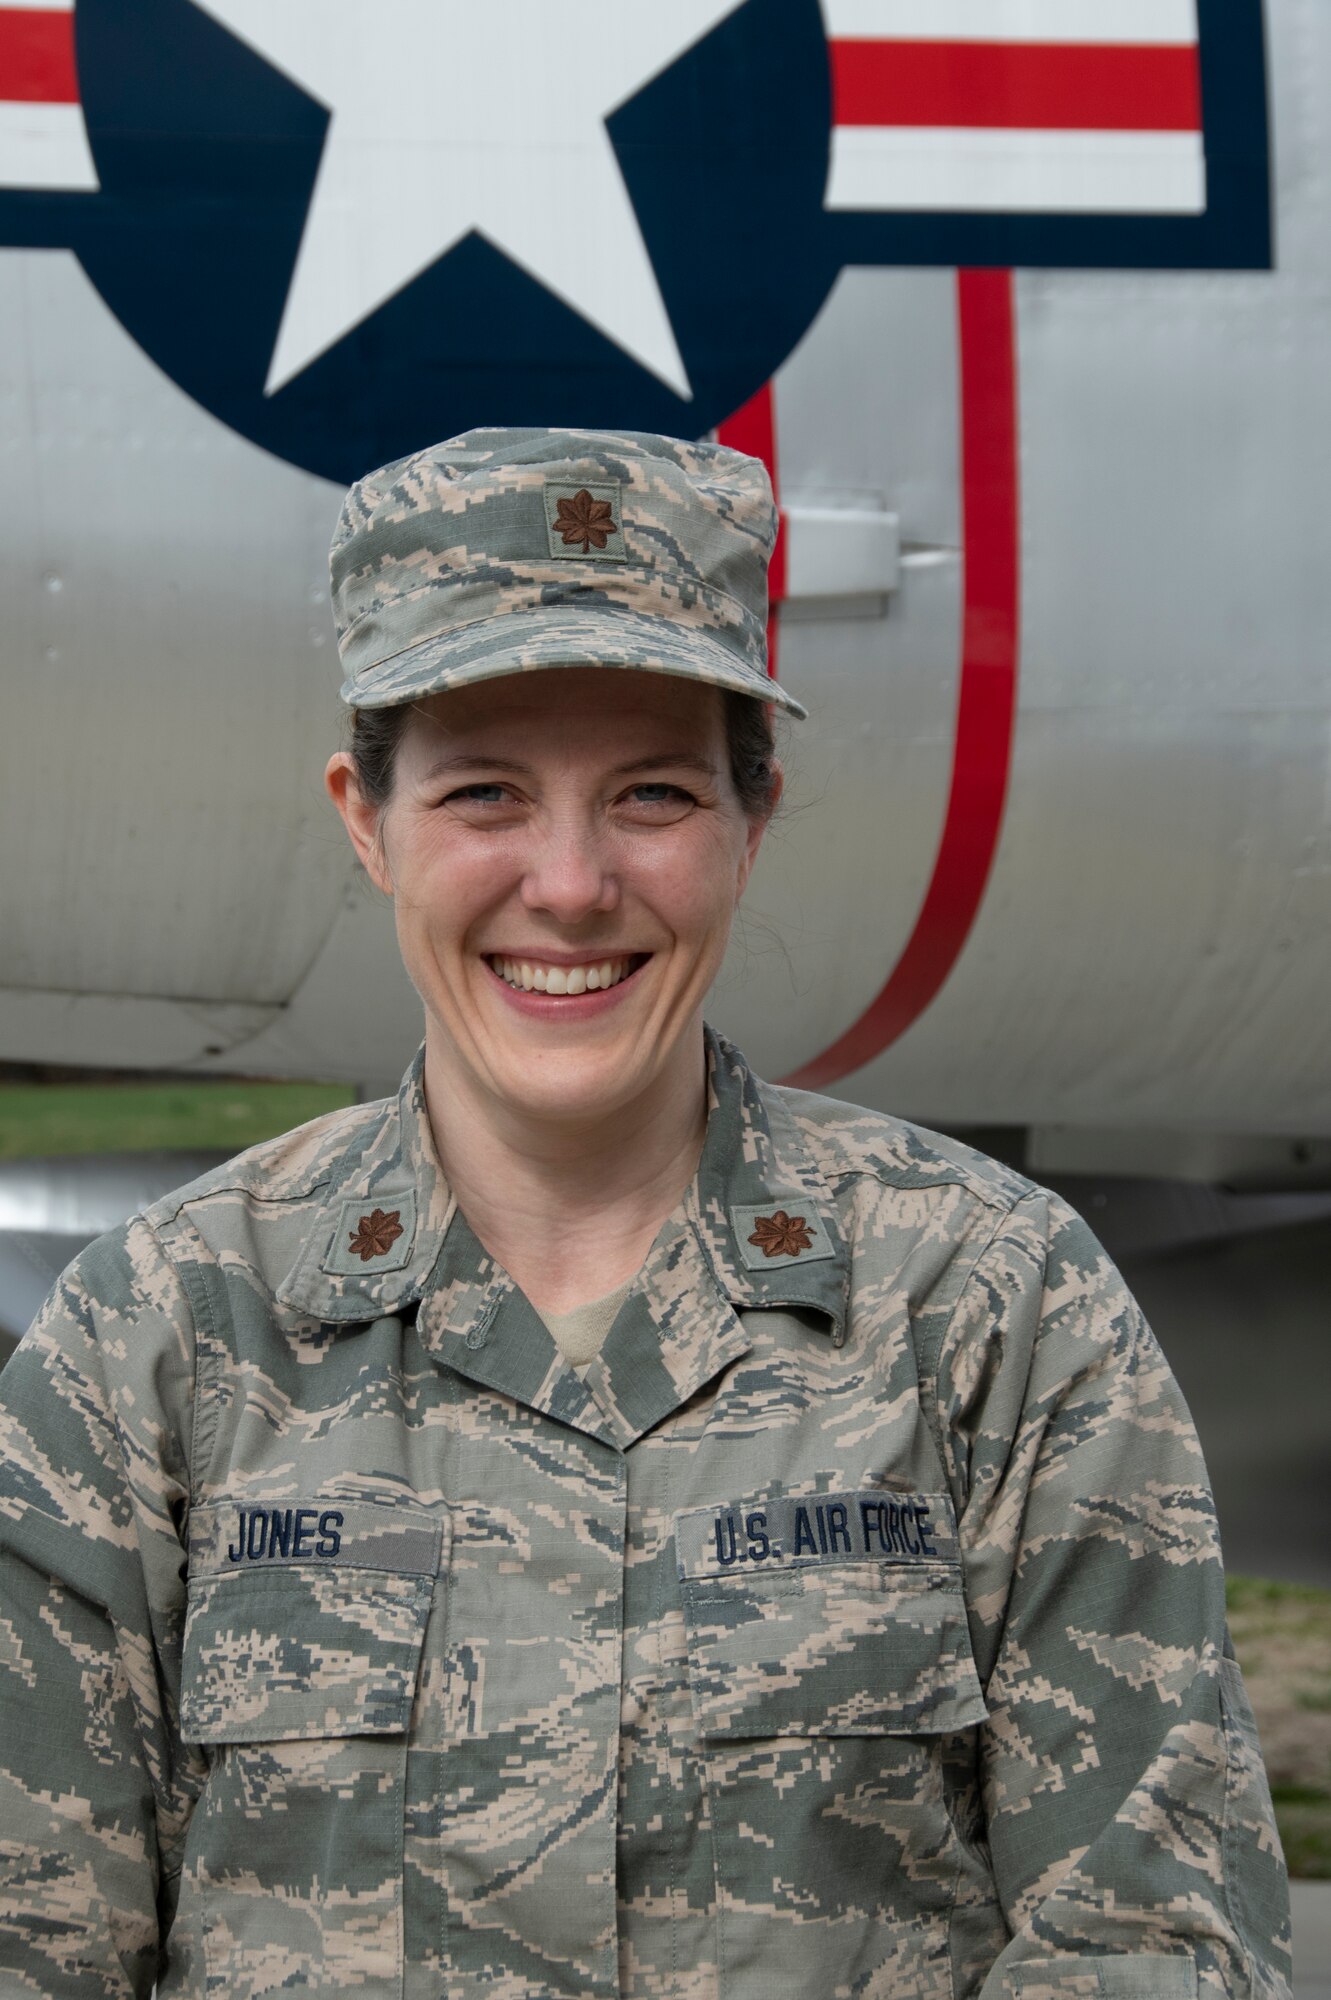 Maj. Barbara Jones, 104th Fighter Wing Public Health Officer, serves to protect Airmen on base and in our community. The 104th Fighter Wing Medical Group Public Health team is being led by Jones in the COVID-19 response. (U.S. Air National Guard Photo by Senior Master Sgt. Julie Avey)